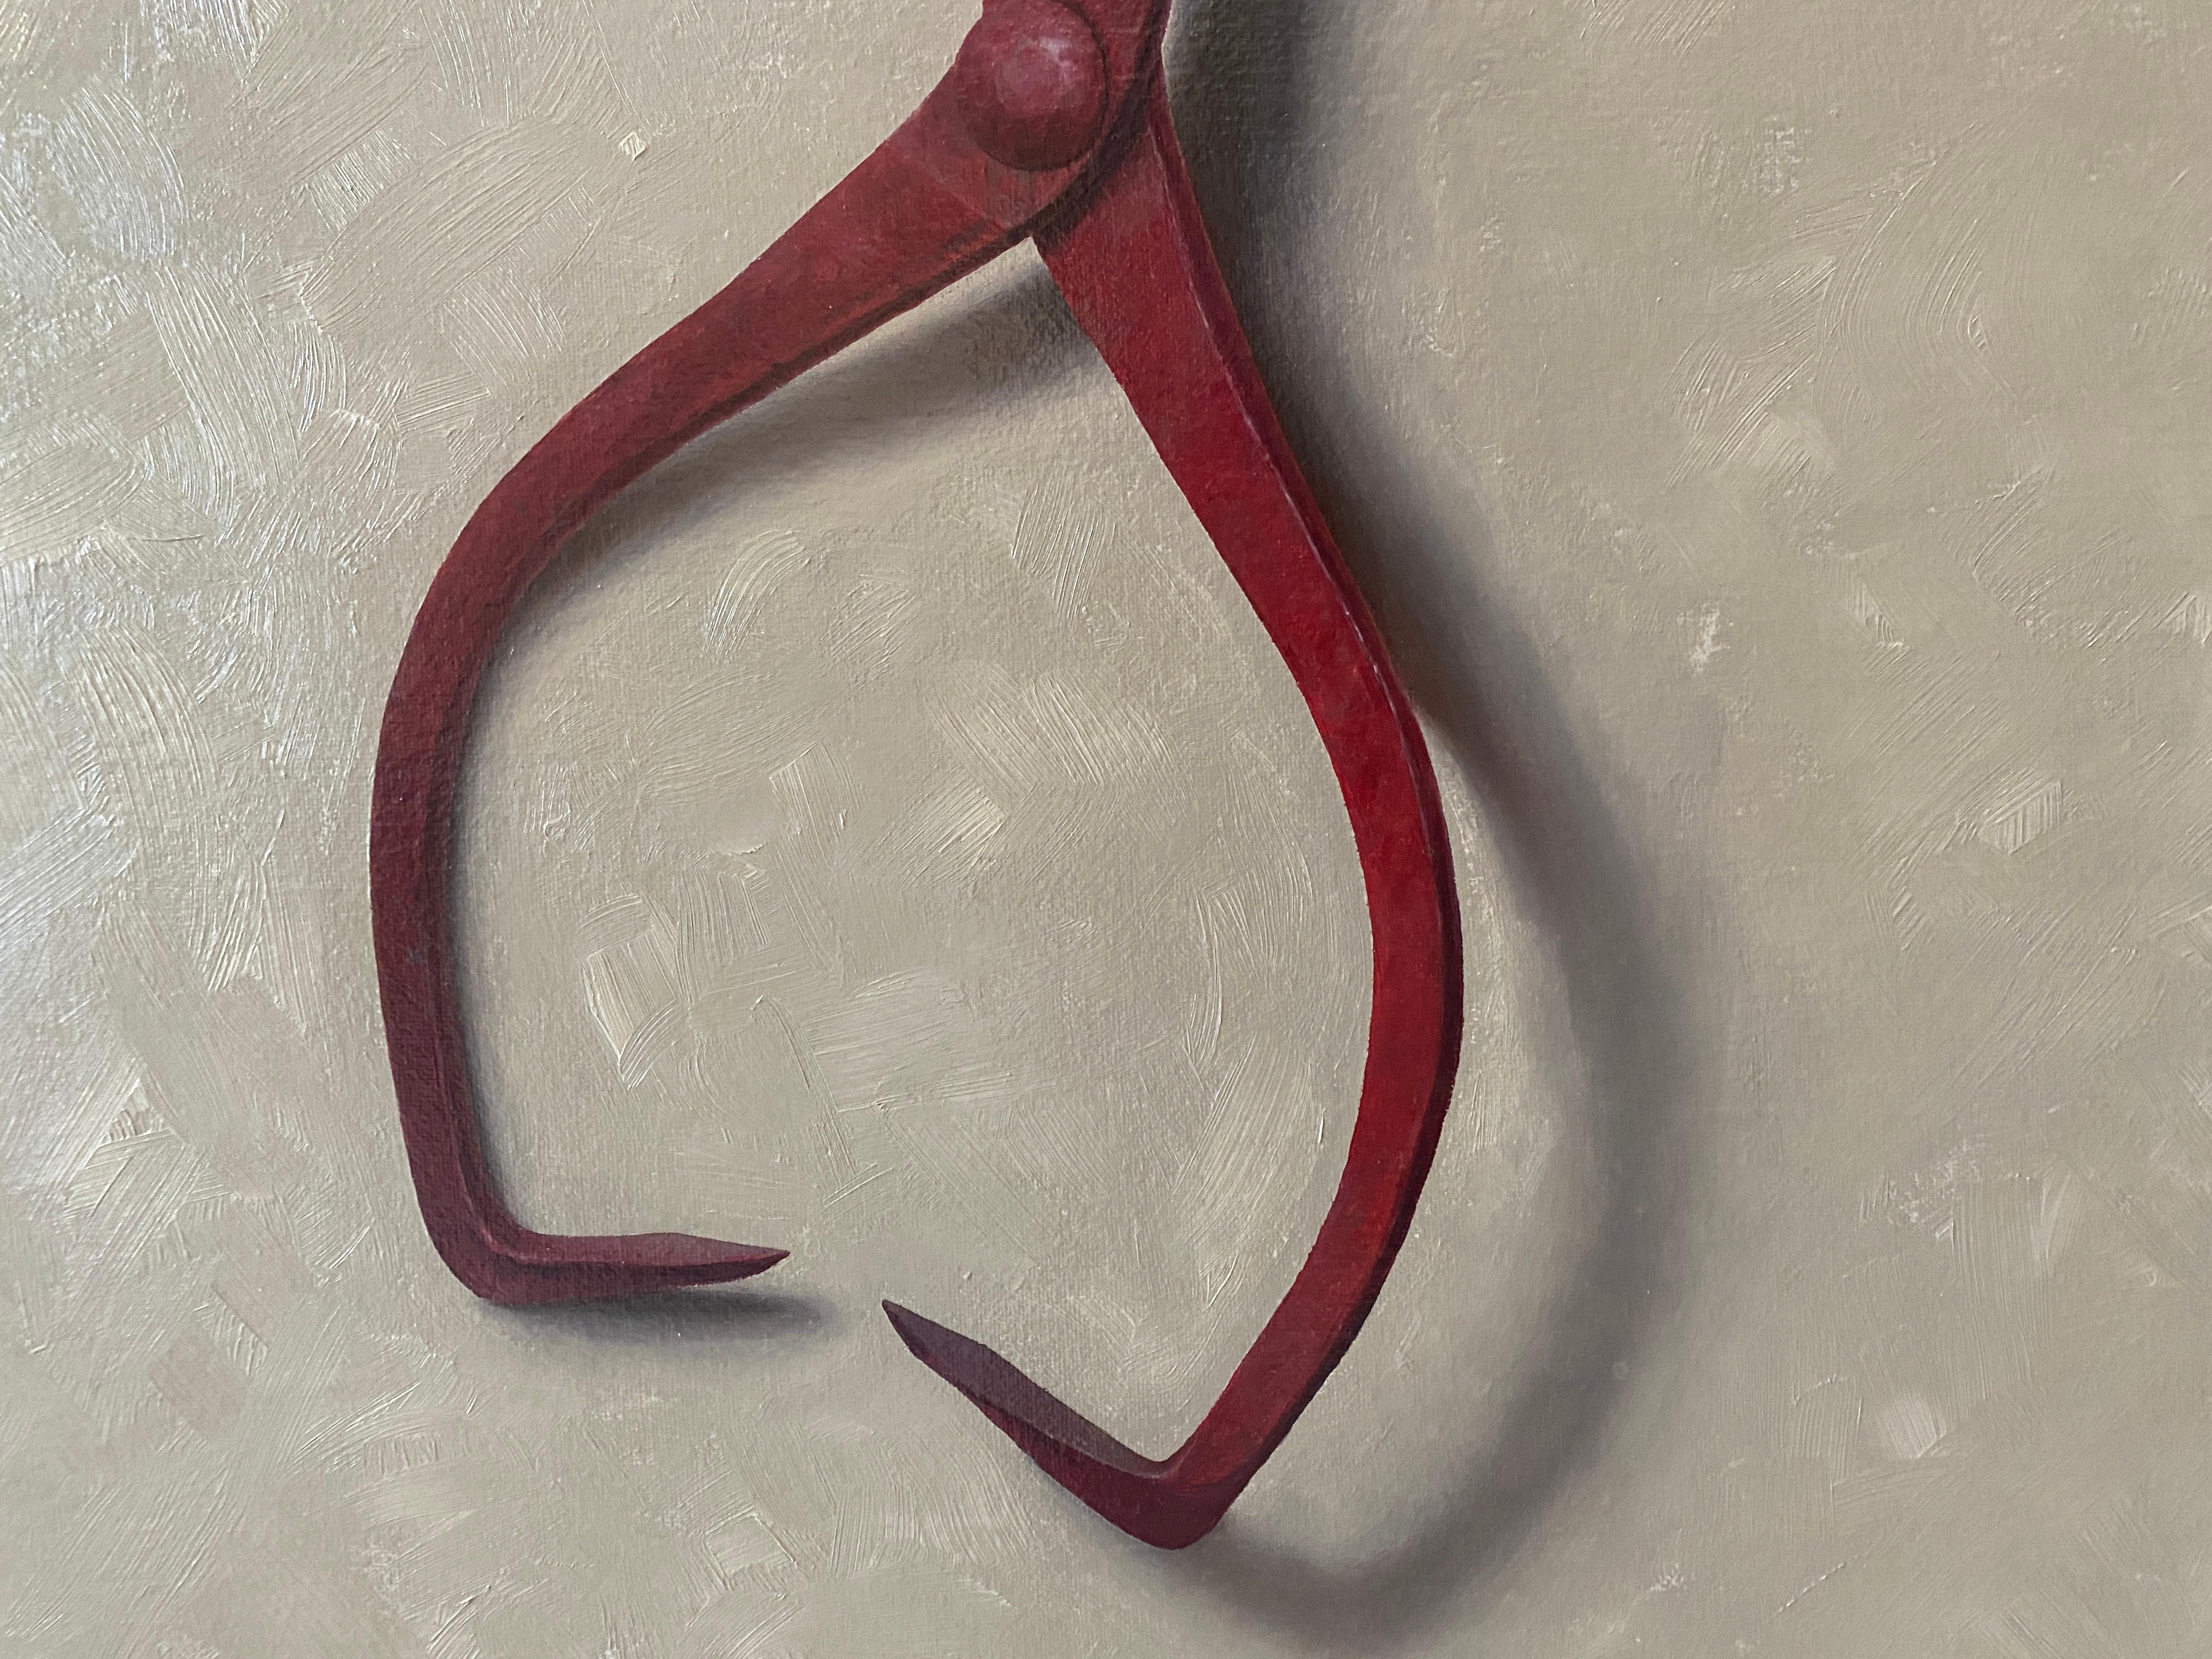 Red Ice Block Tongs - American Realist Painting by John Morfis